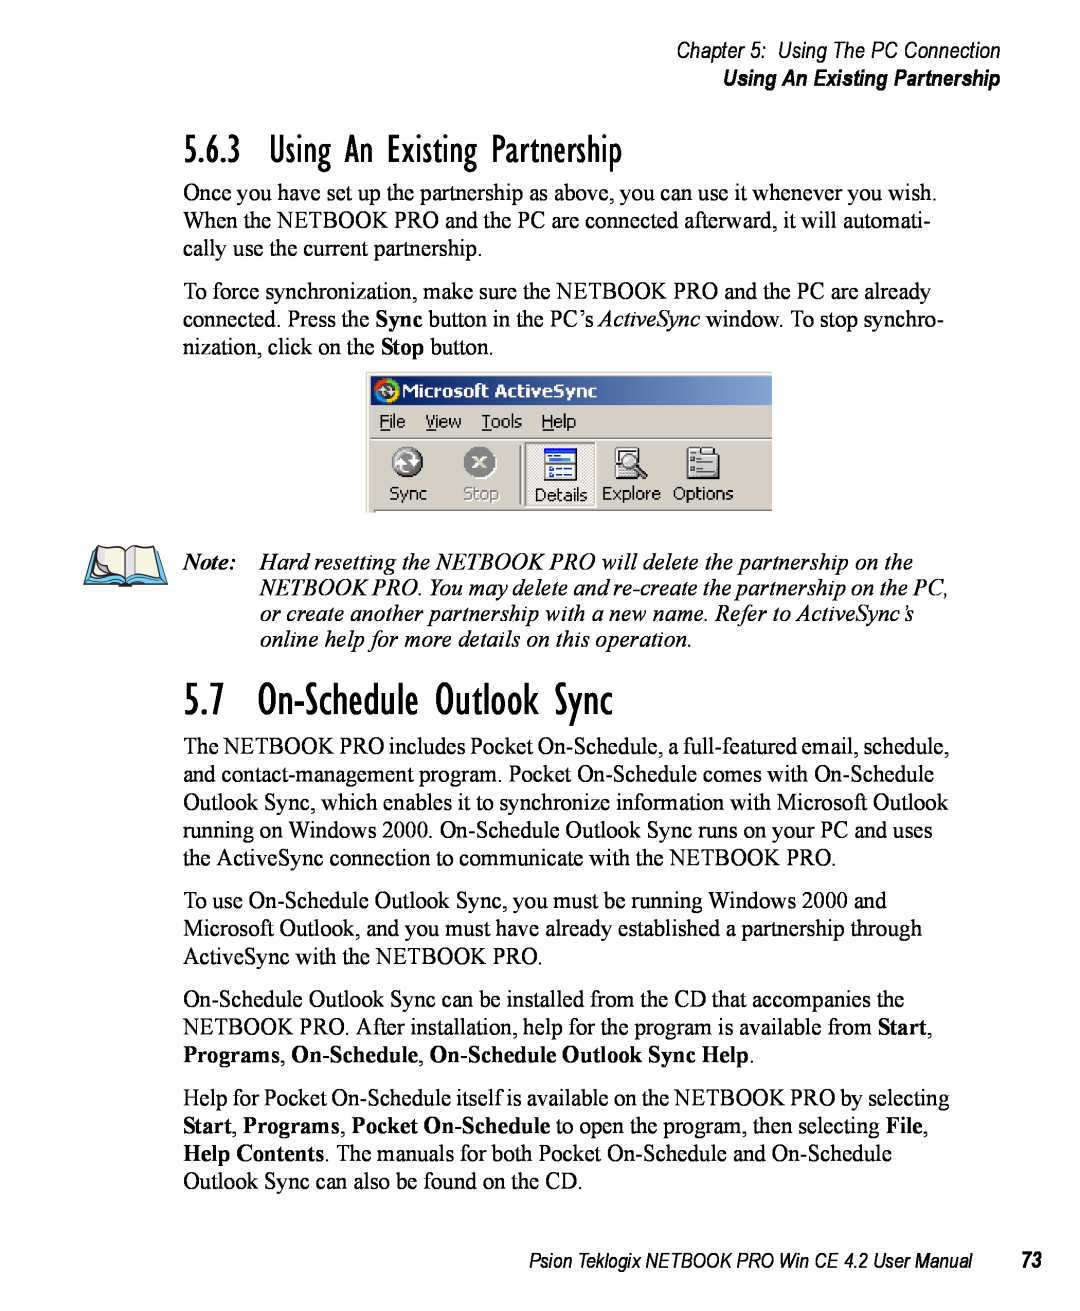 Psion Teklogix Win CE 4.2 user manual On-Schedule Outlook Sync, Using An Existing Partnership, Using The PC Connection 